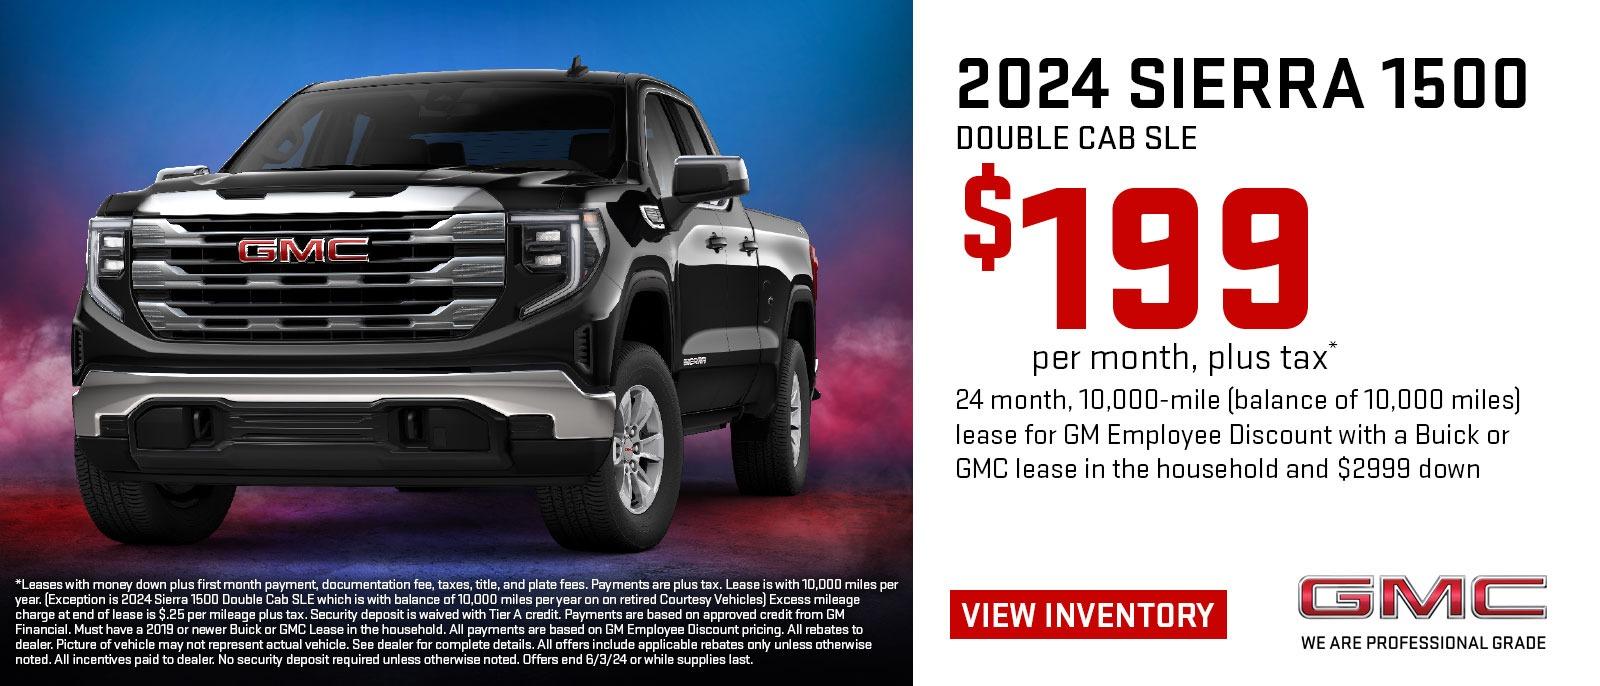 2024 Sierra 1500 Double Cab SLE
$199 per month, plus tax*
24 months, 10,000-mile (balance of 10,000 miles) lease for GM Employee Discount with a Buick or GMC lease in the household and $2999 down